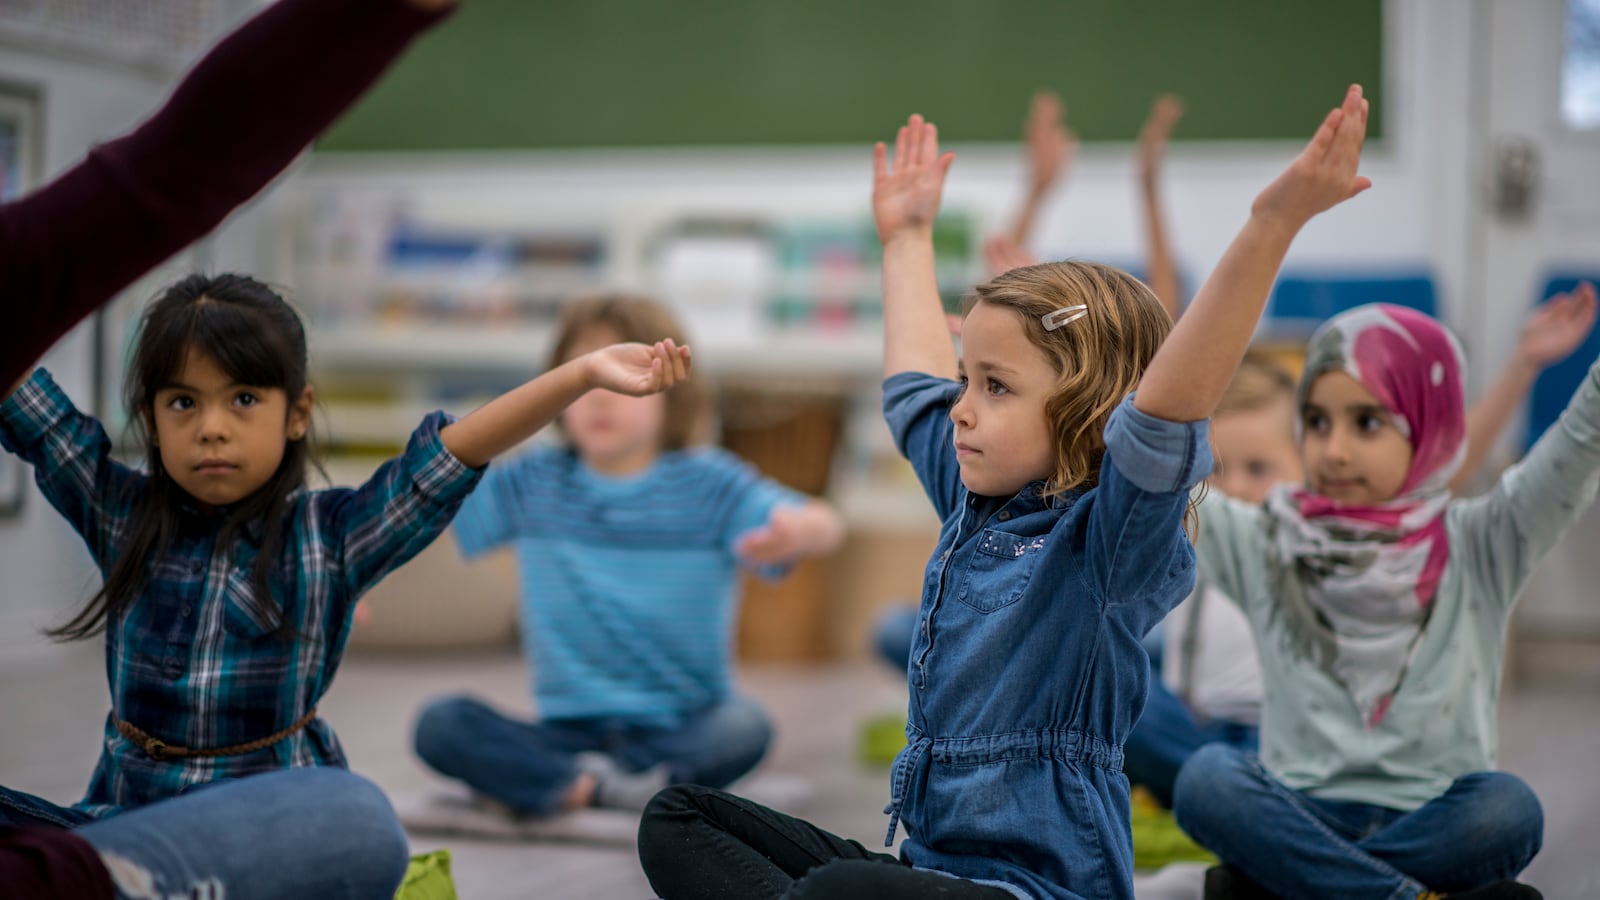 A multi-ethnic group of young school children are indoors in their classroom. They are sitting on pillows and doing yoga together. They are stretching their arms out above their heads.